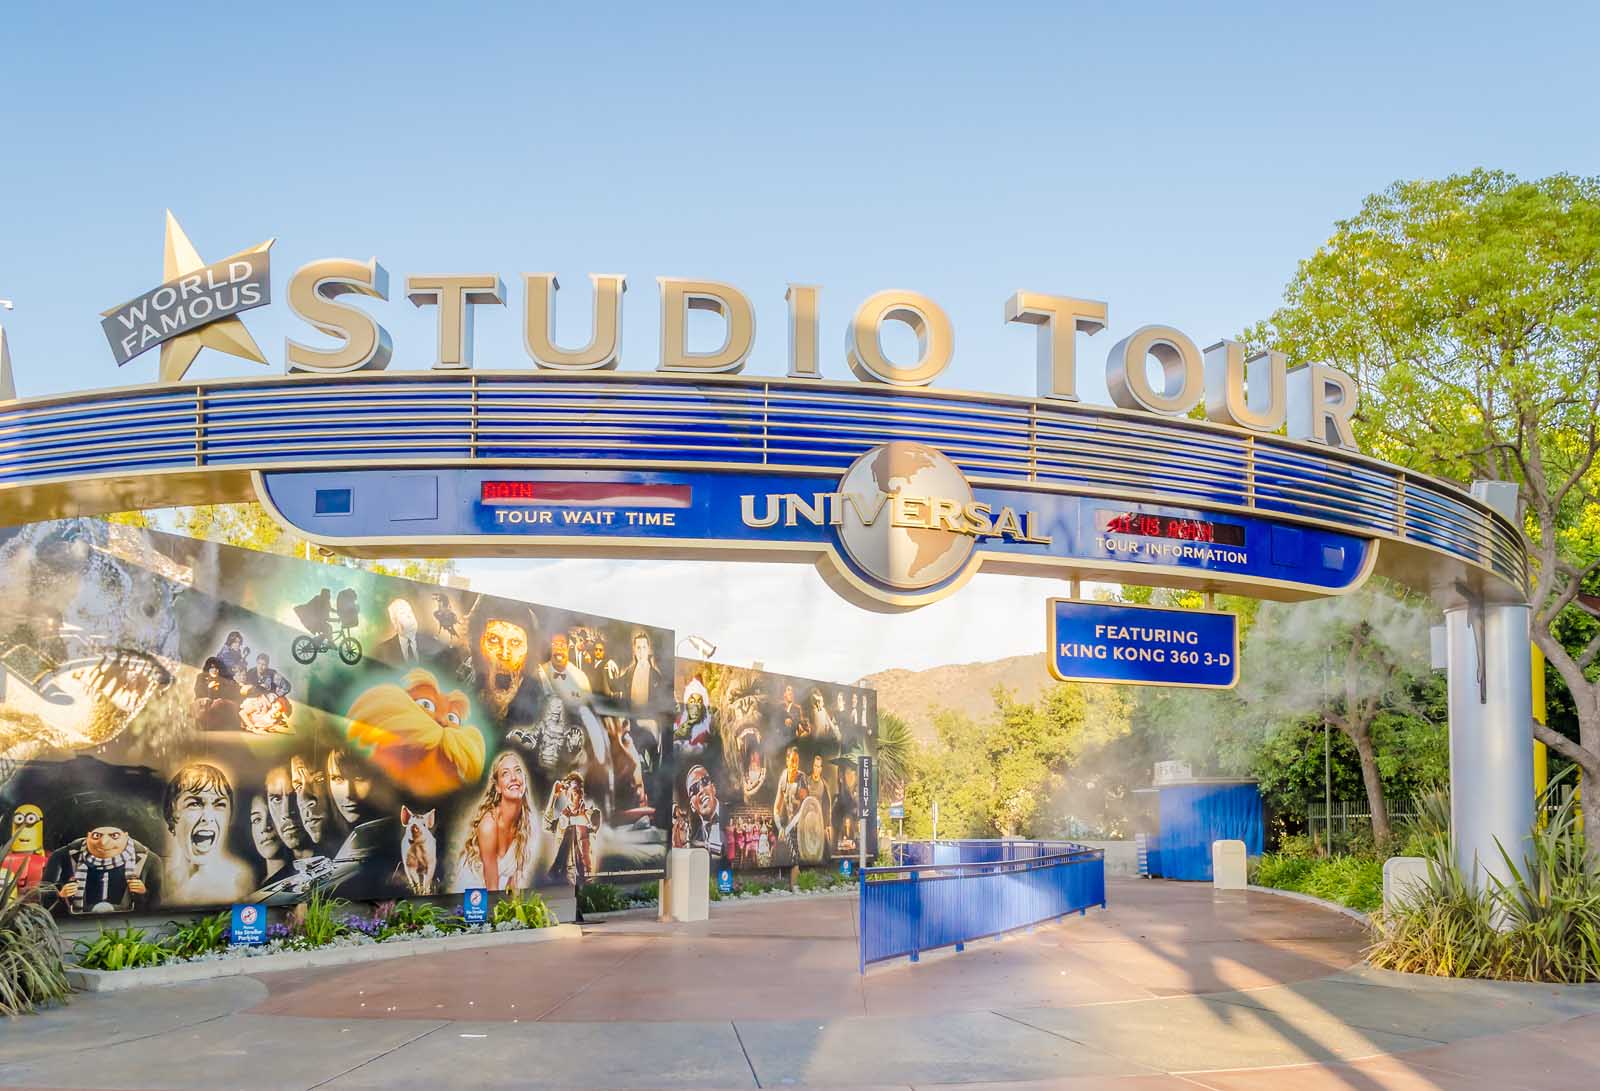 fun things to do in Hollywood California Universal Studios Hollywood with rides and attractions